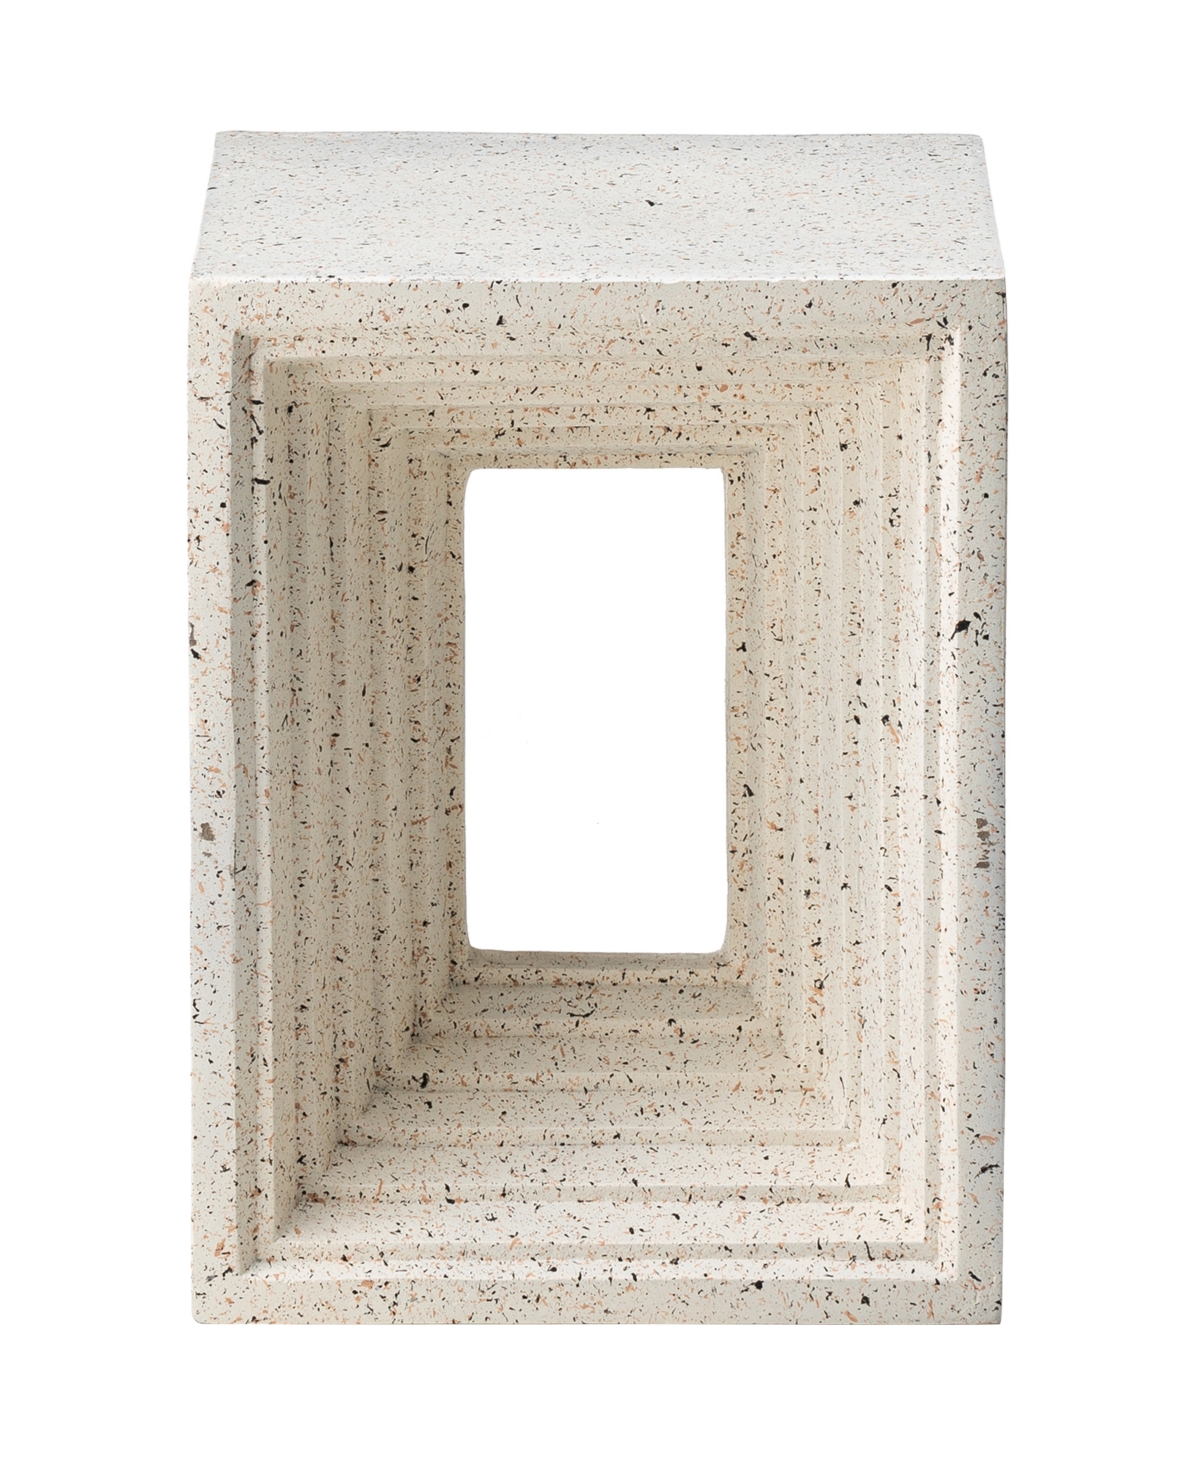 Multi-functional Faux Terrazzo Square Garden Stool or Plant Stand or Accent Table - White